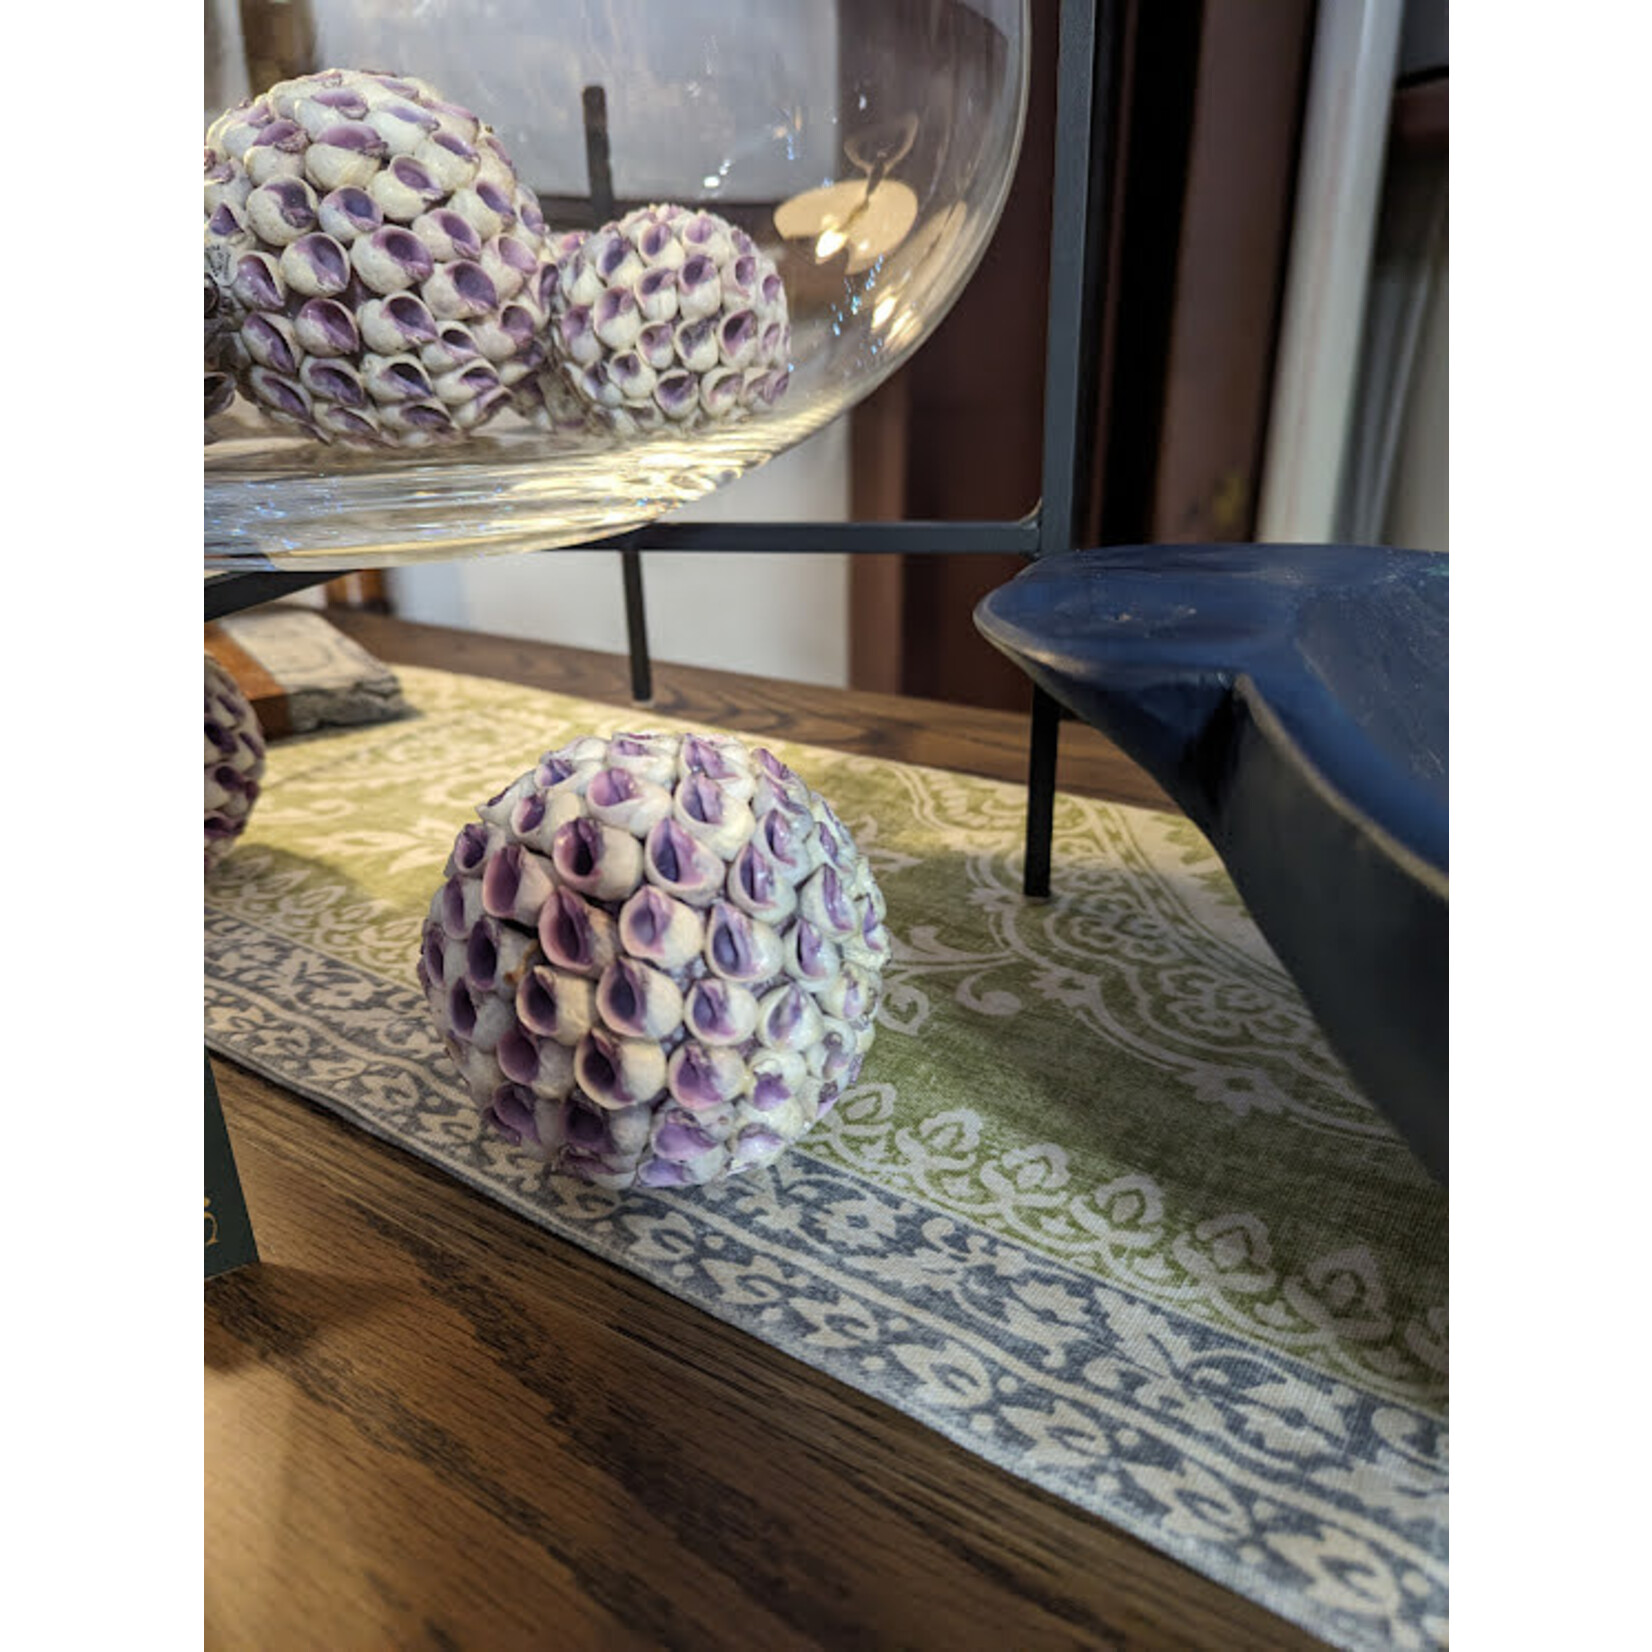 Roost Lavender Shell Sphere 3.5"